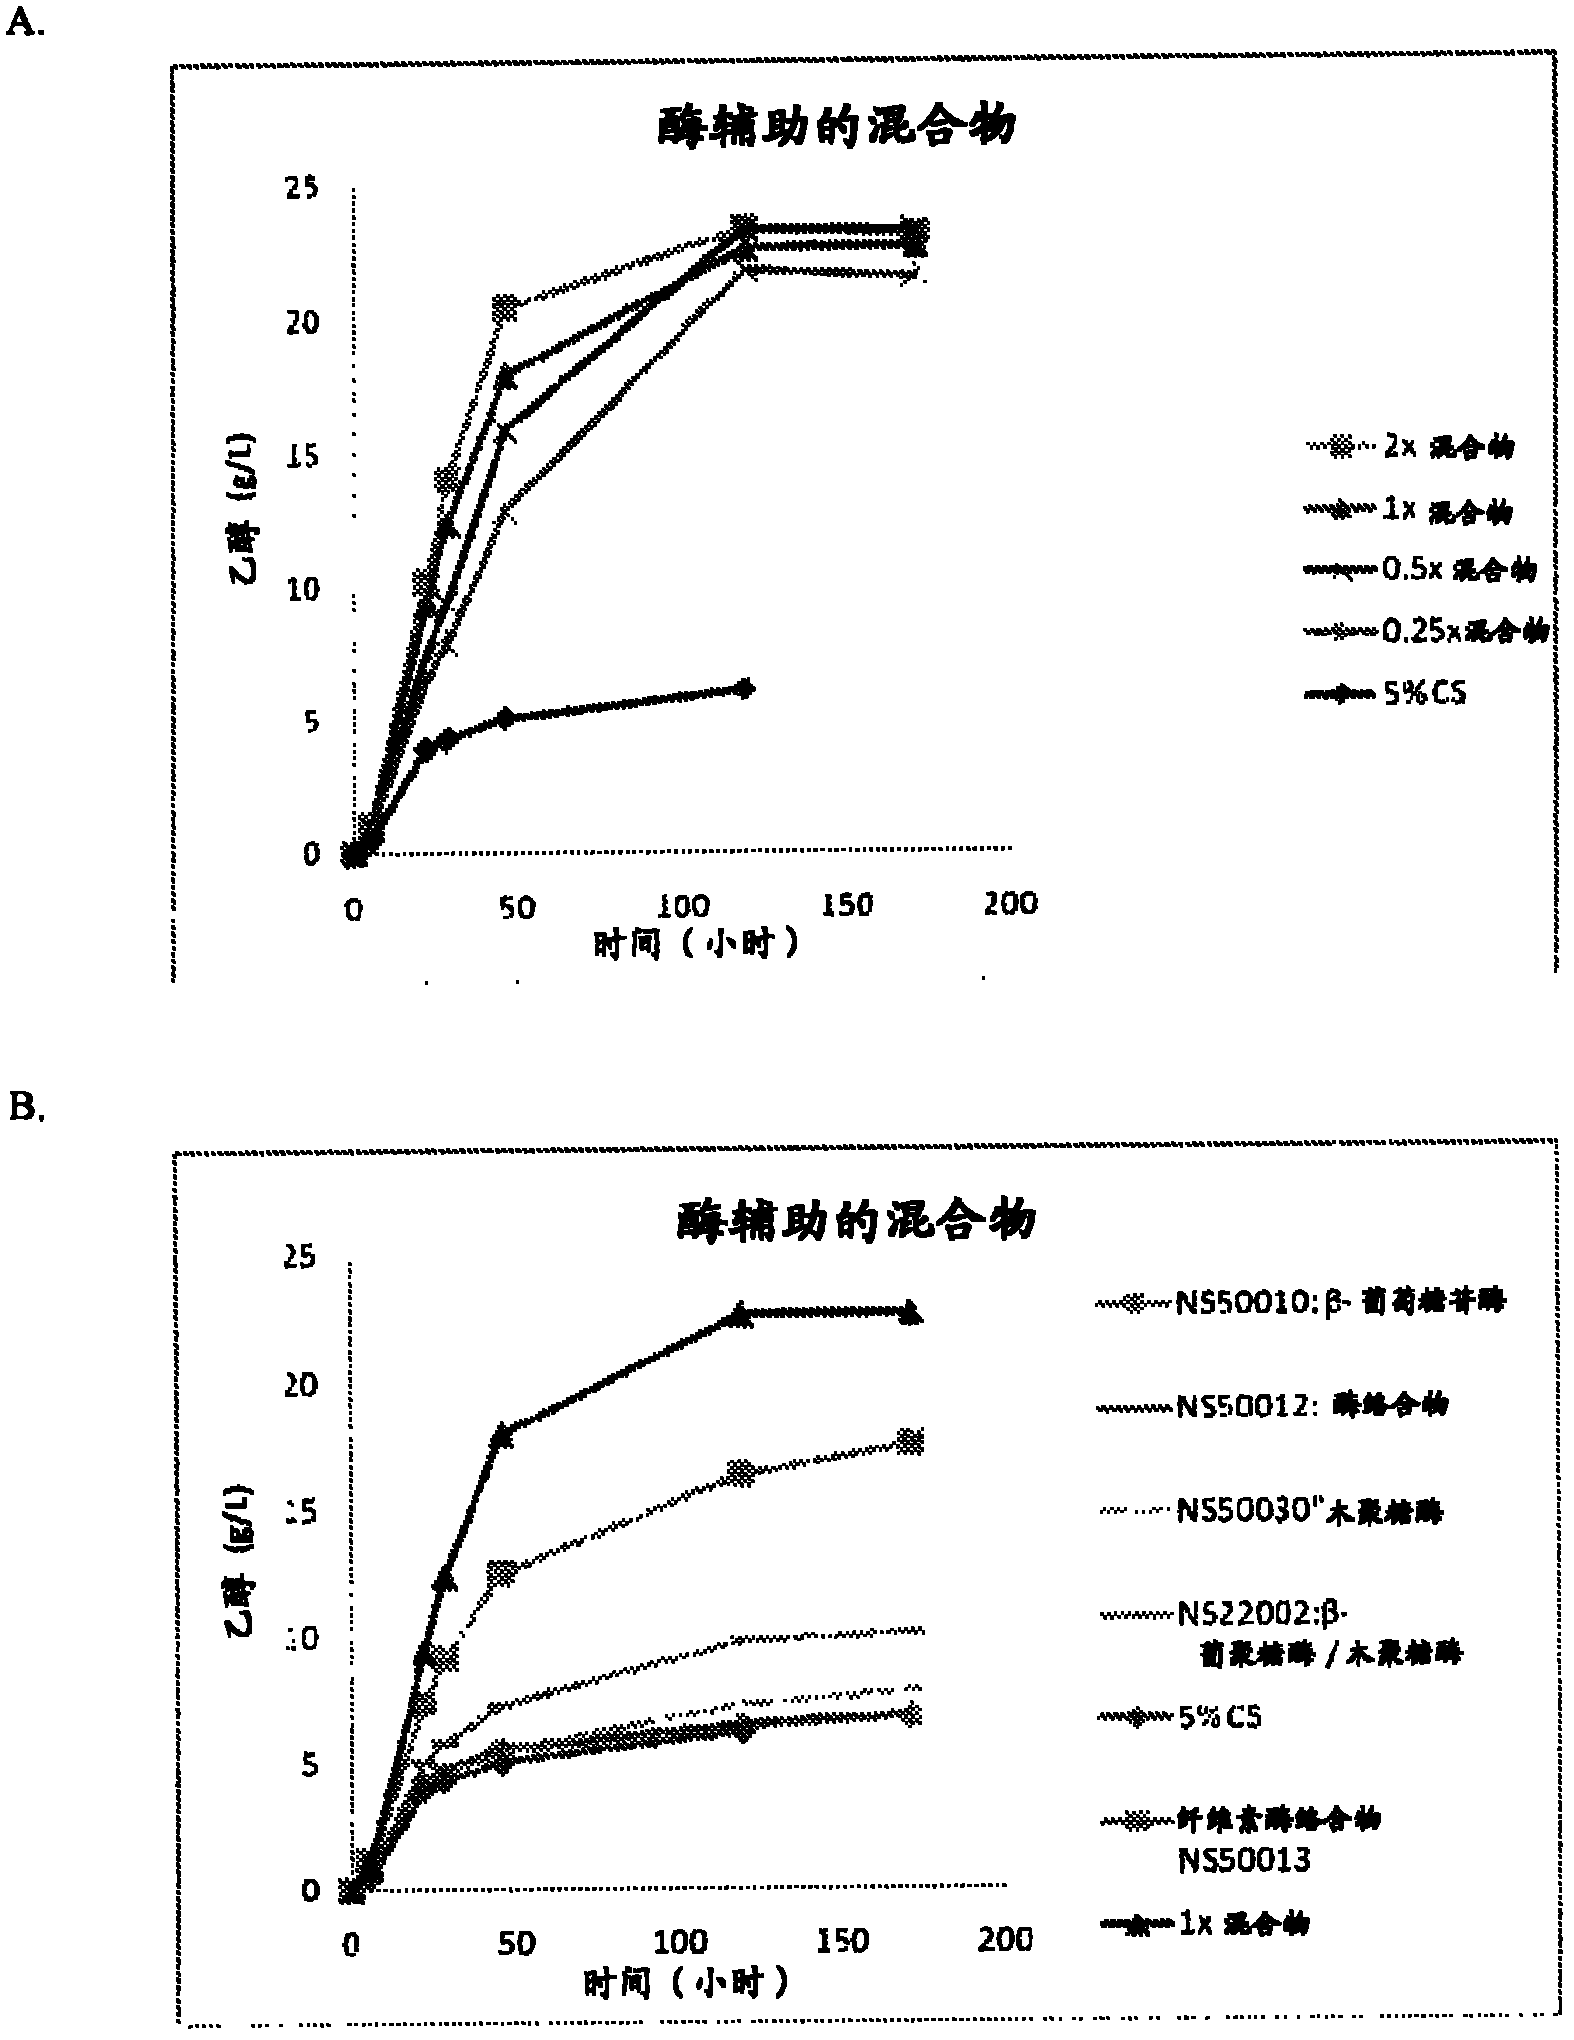 Compositions and methods for improved saccharification of biomass